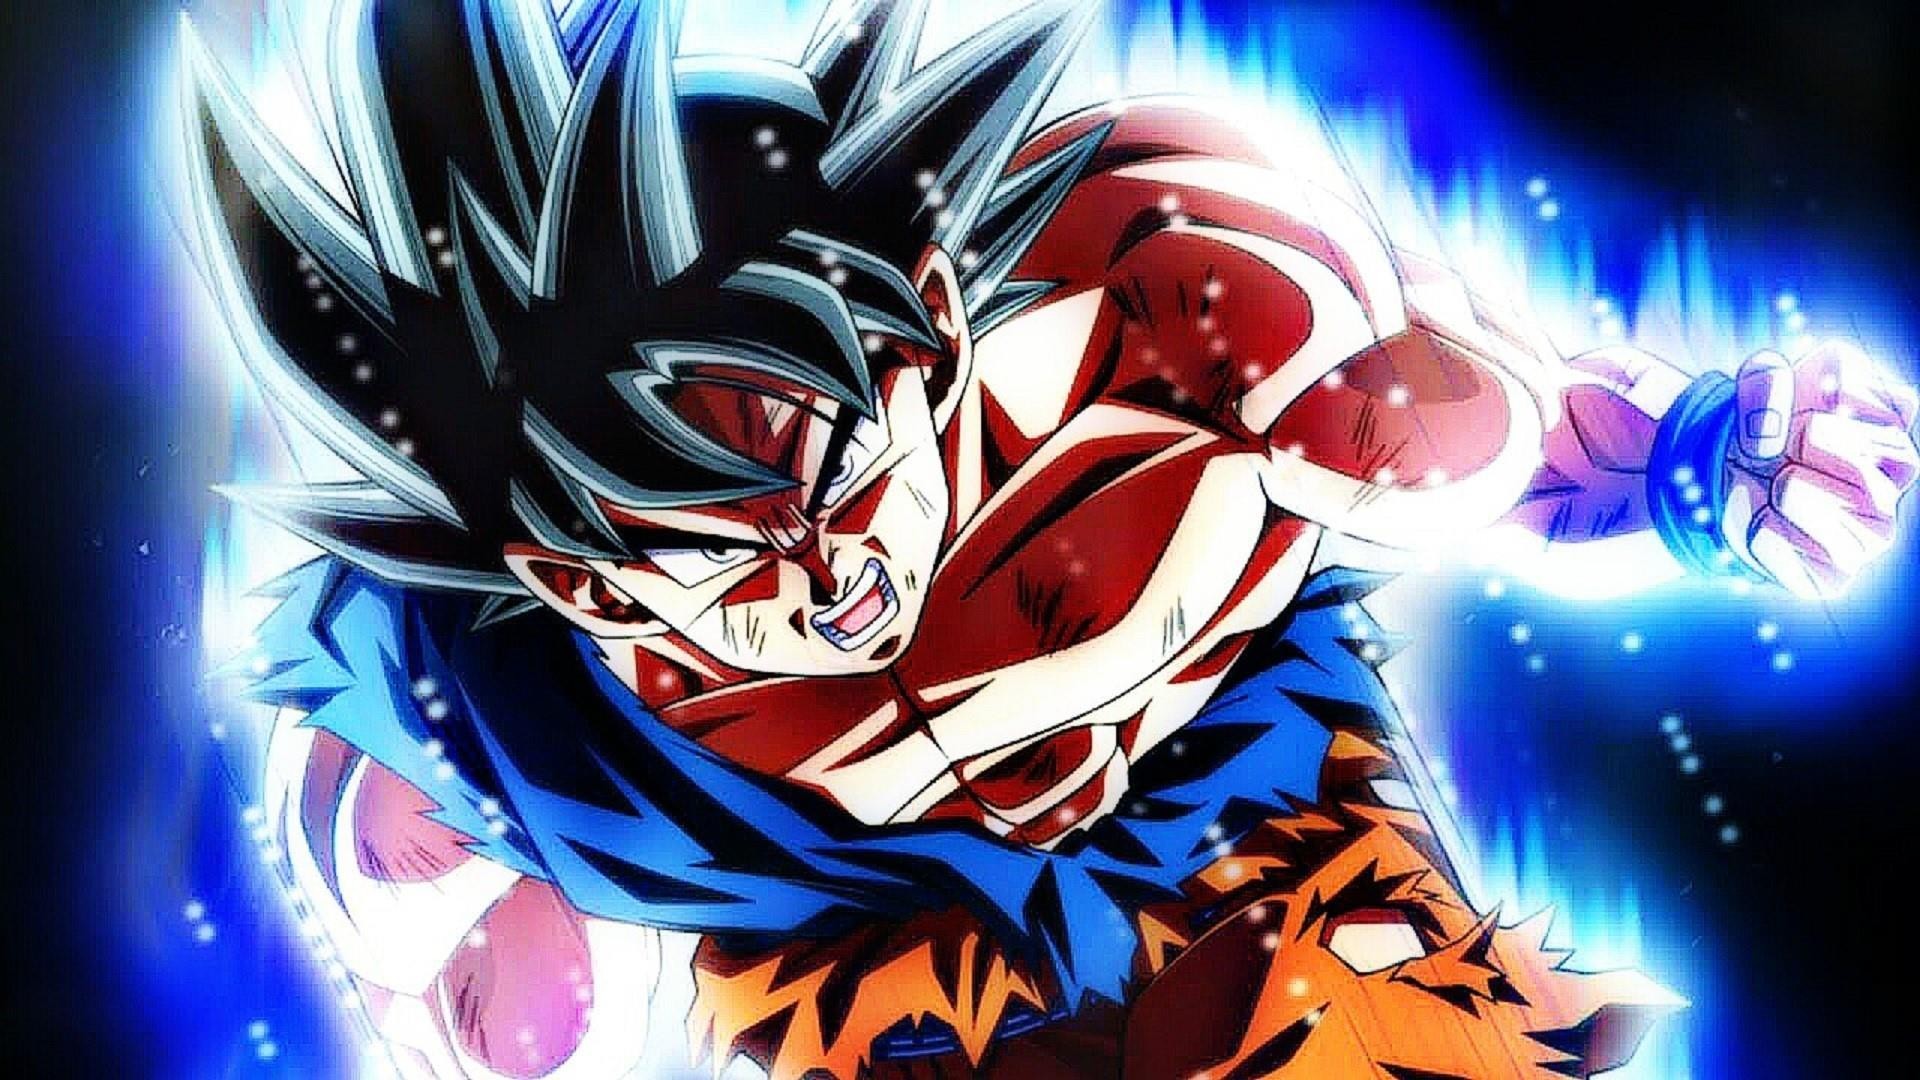 Best Goku Wallpaper with resolution 1920X1080 pixel. You can use this wallpaper as background for your desktop Computer Screensavers, Android or iPhone smartphones